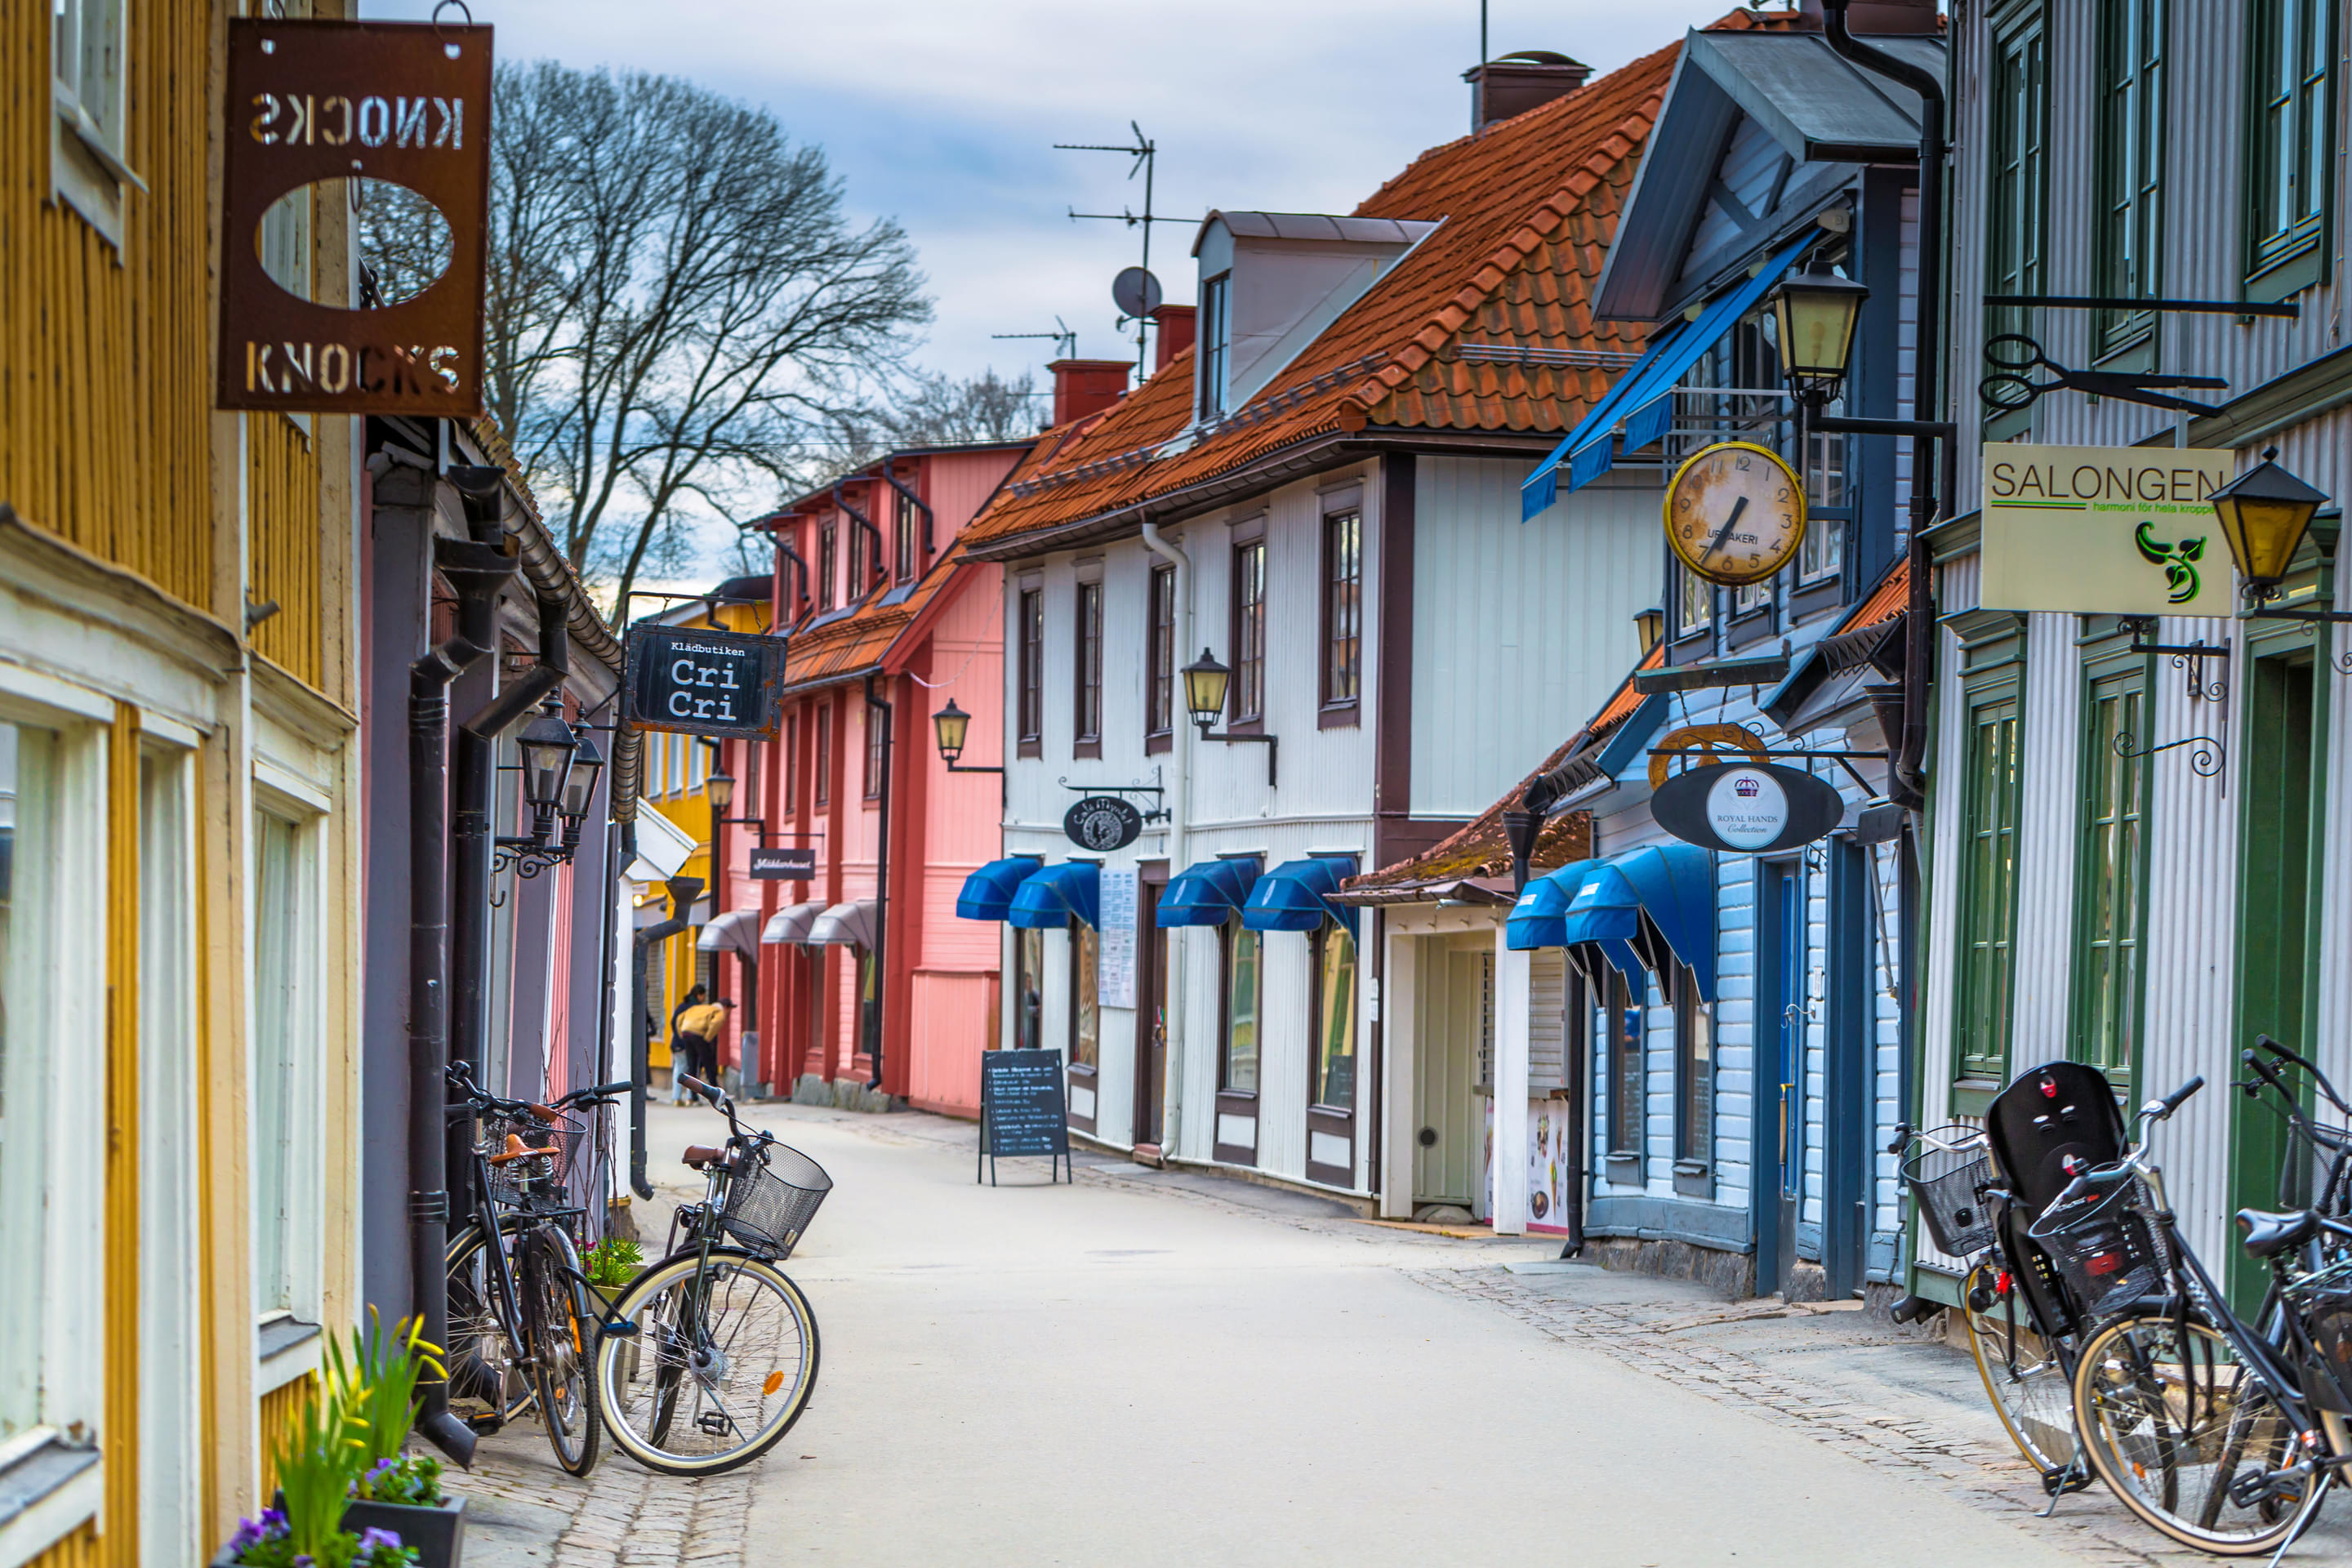 Sigtuna Overview